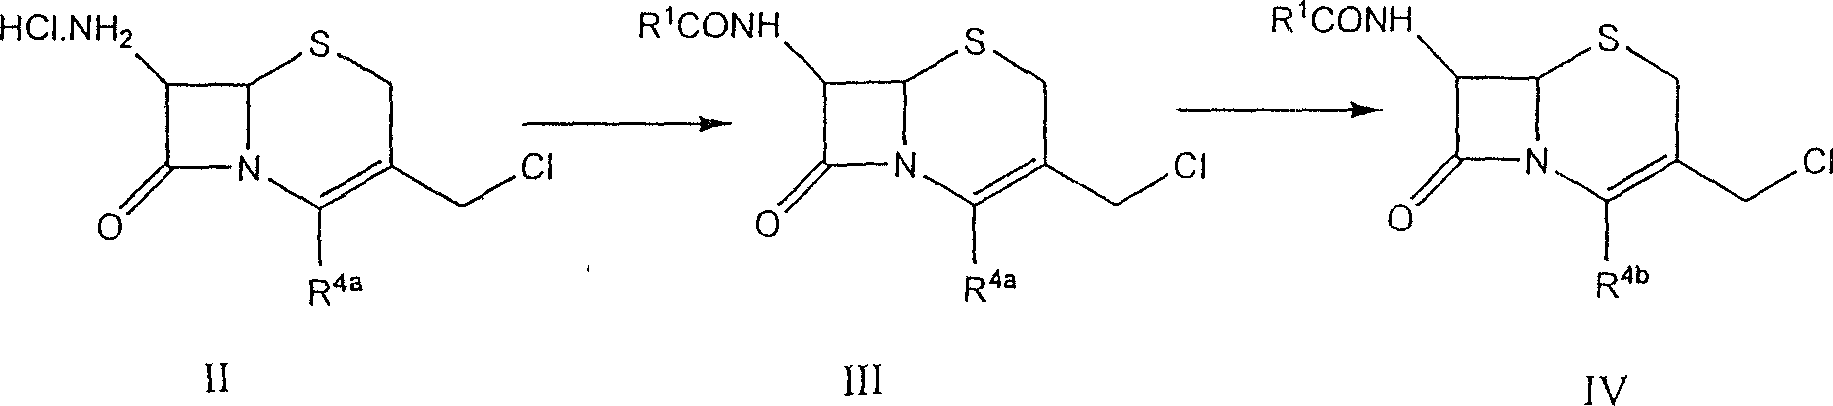 Compound of onium salt in Cephalosprins, preparation method, and method for synthesizing vitriolic cefpyrazole from the compound